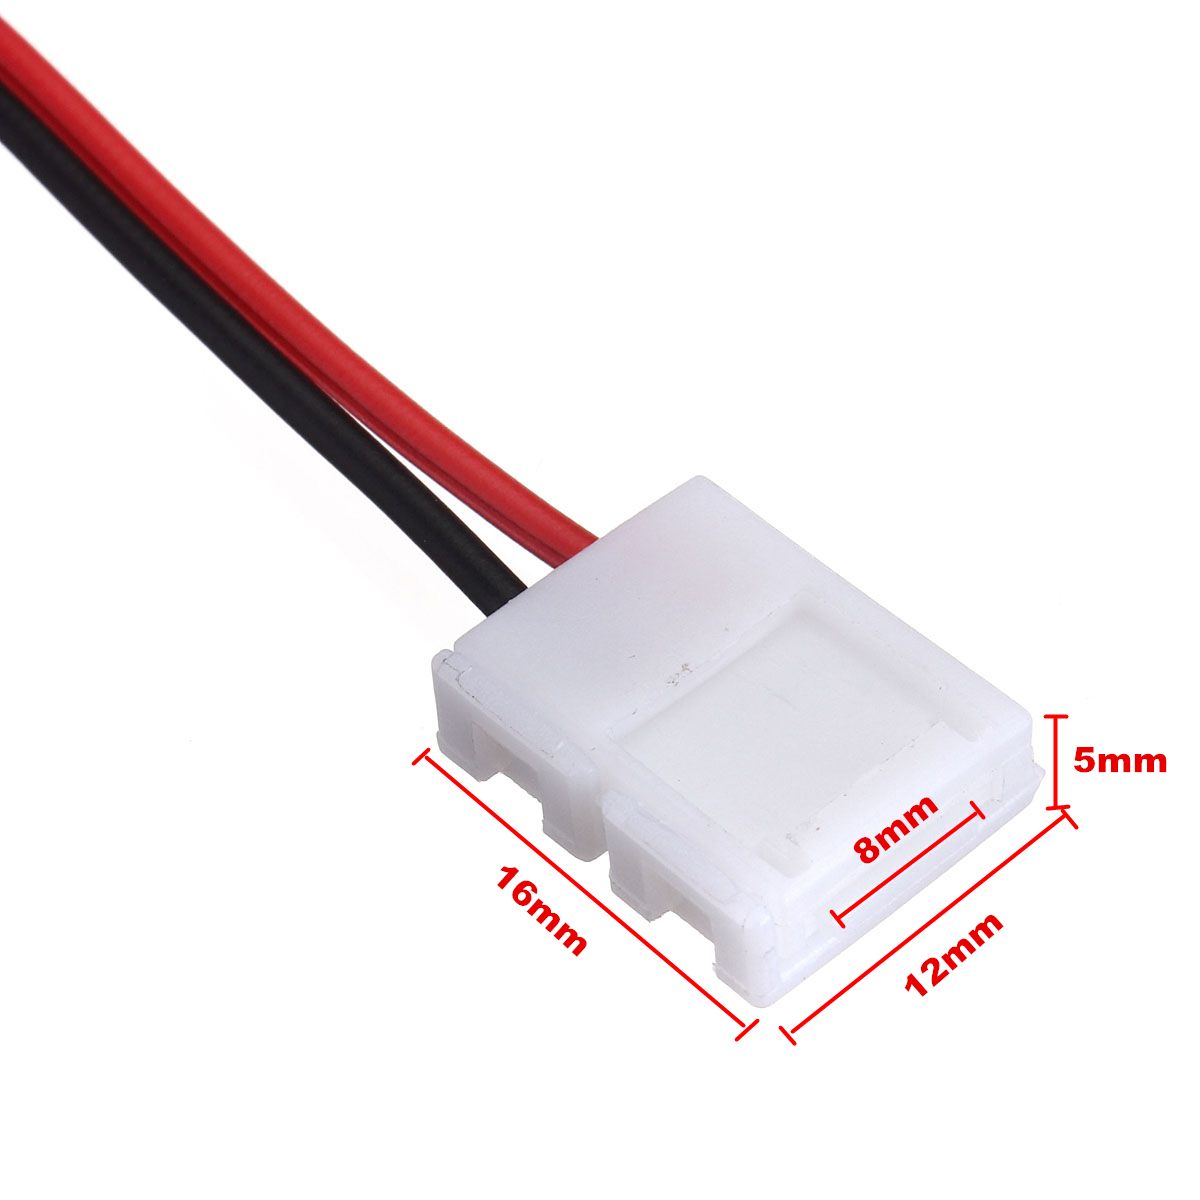 LUSTREON-2-Pins-Power-Connector-Adaptor-For-35285050-Led-Strip-Wire-With-PCB-1199478